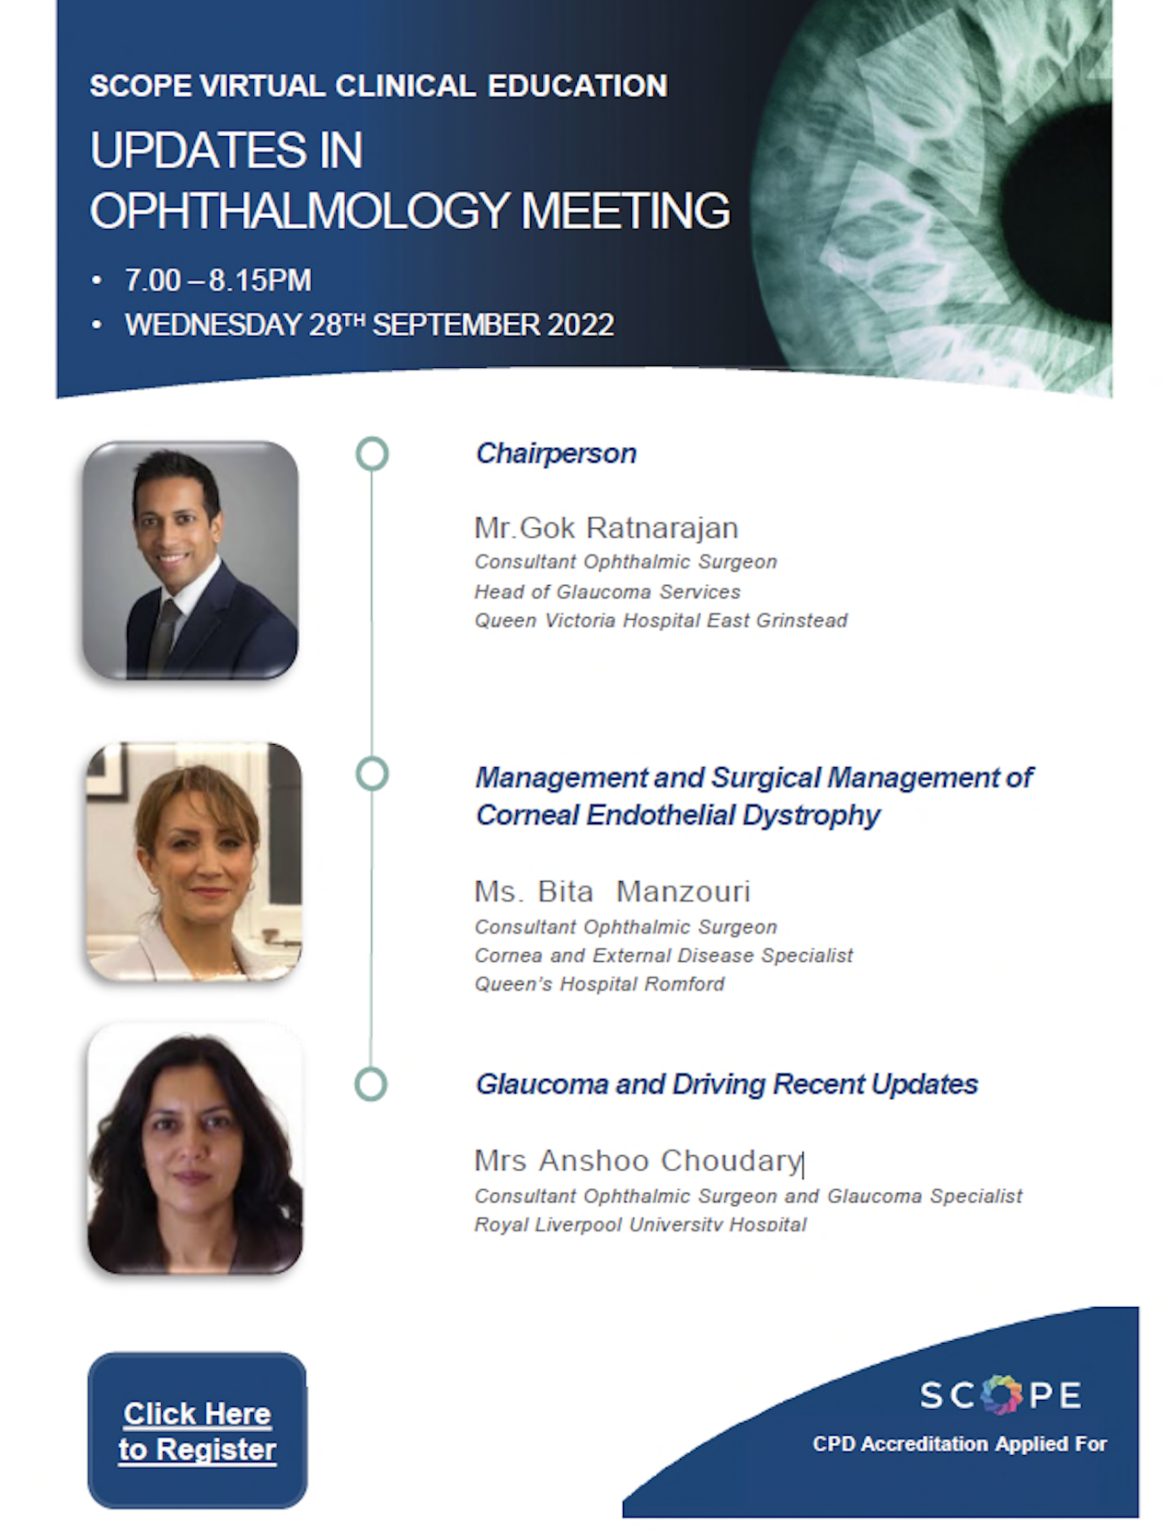 Scope Updates in Ophthalmology Meeting 28th September